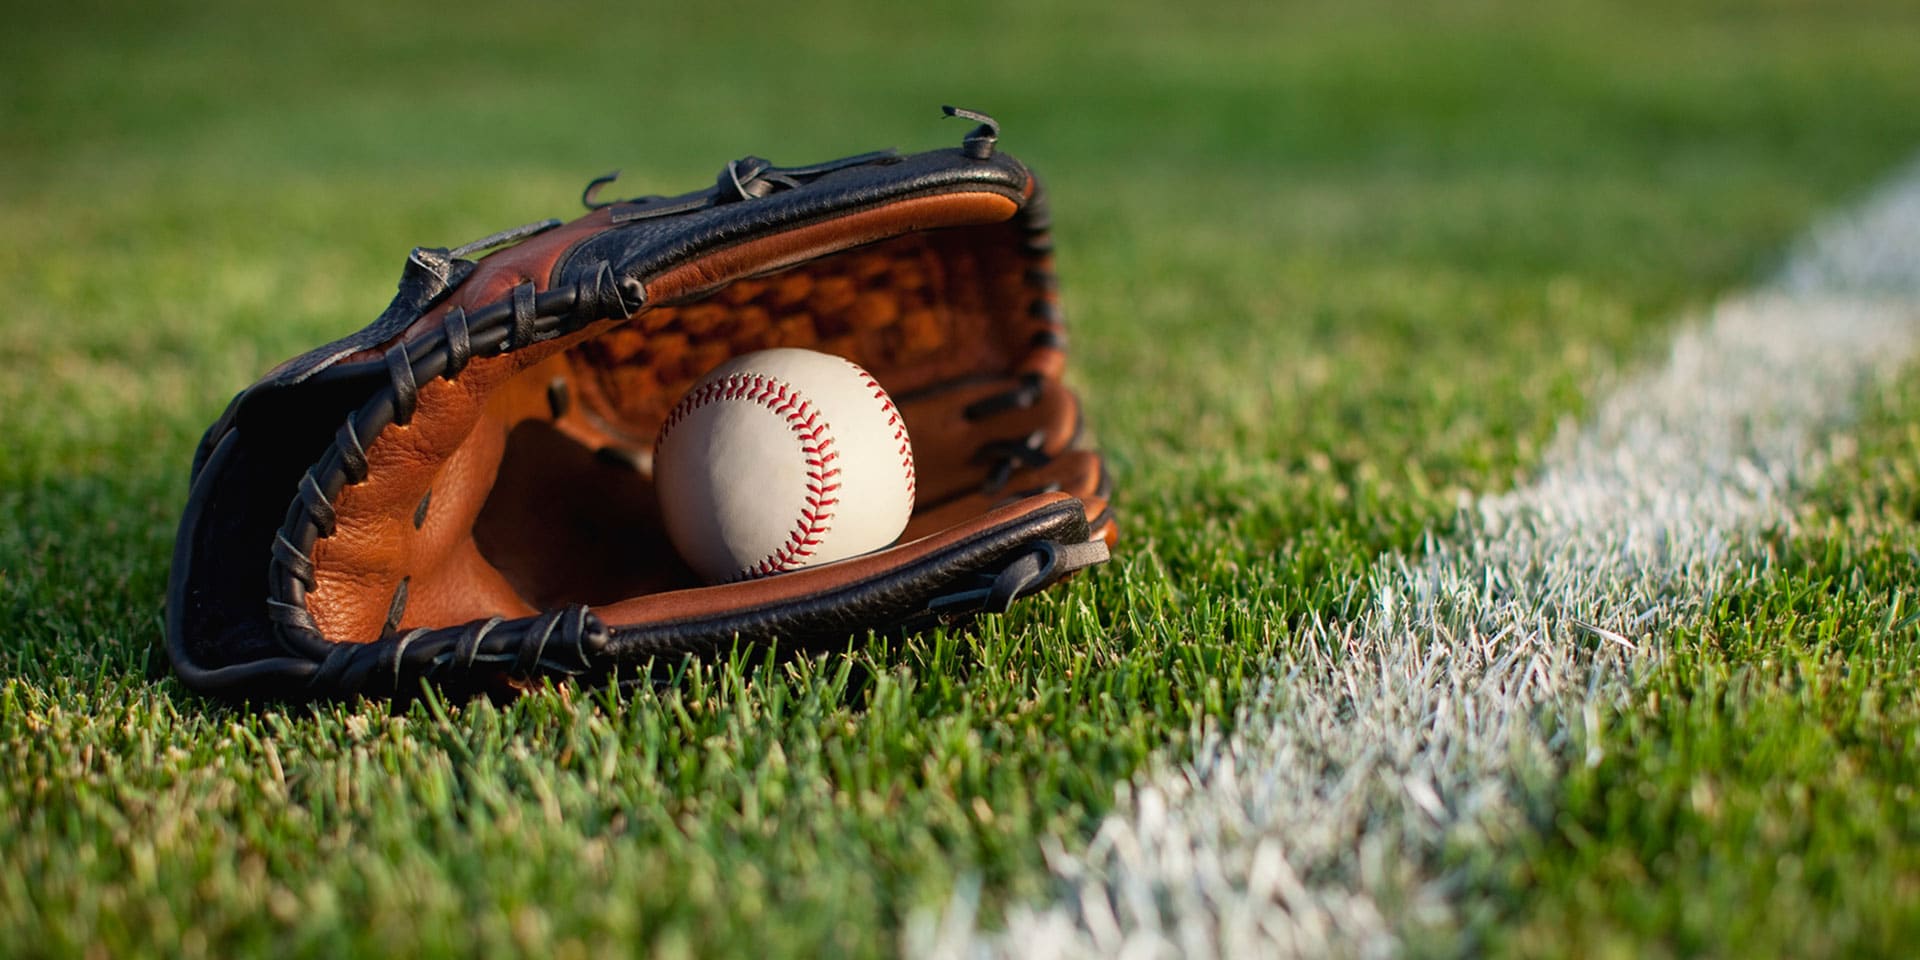 Batter Up: Get in Gear and Handle Spring Training in Tampa Like a Pro